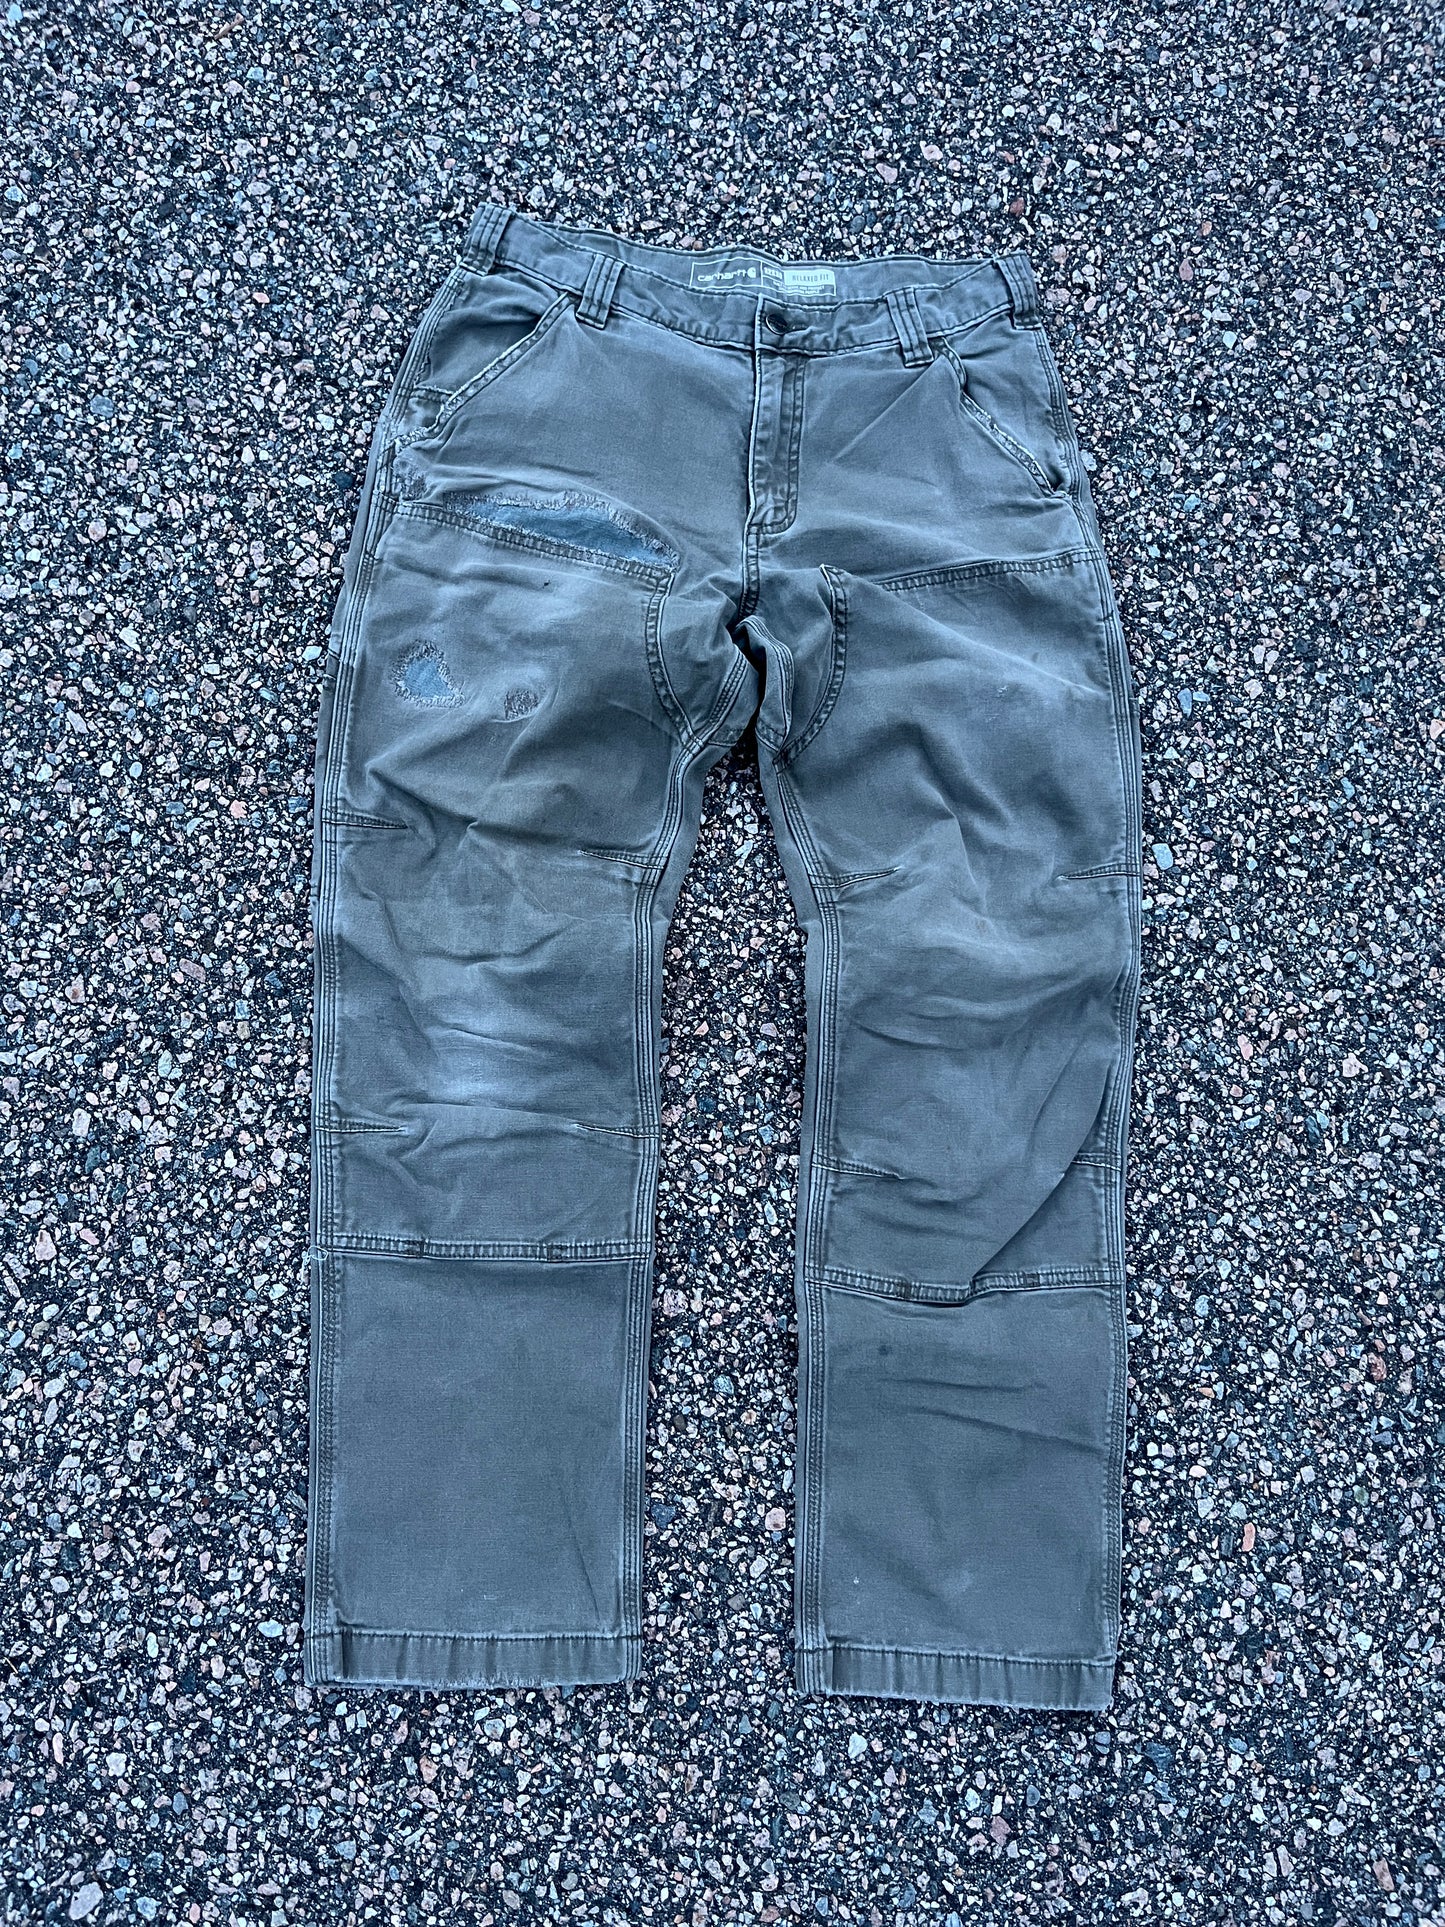 Faded Cement Grey Carhartt Double Knee Pants - 30 x 28